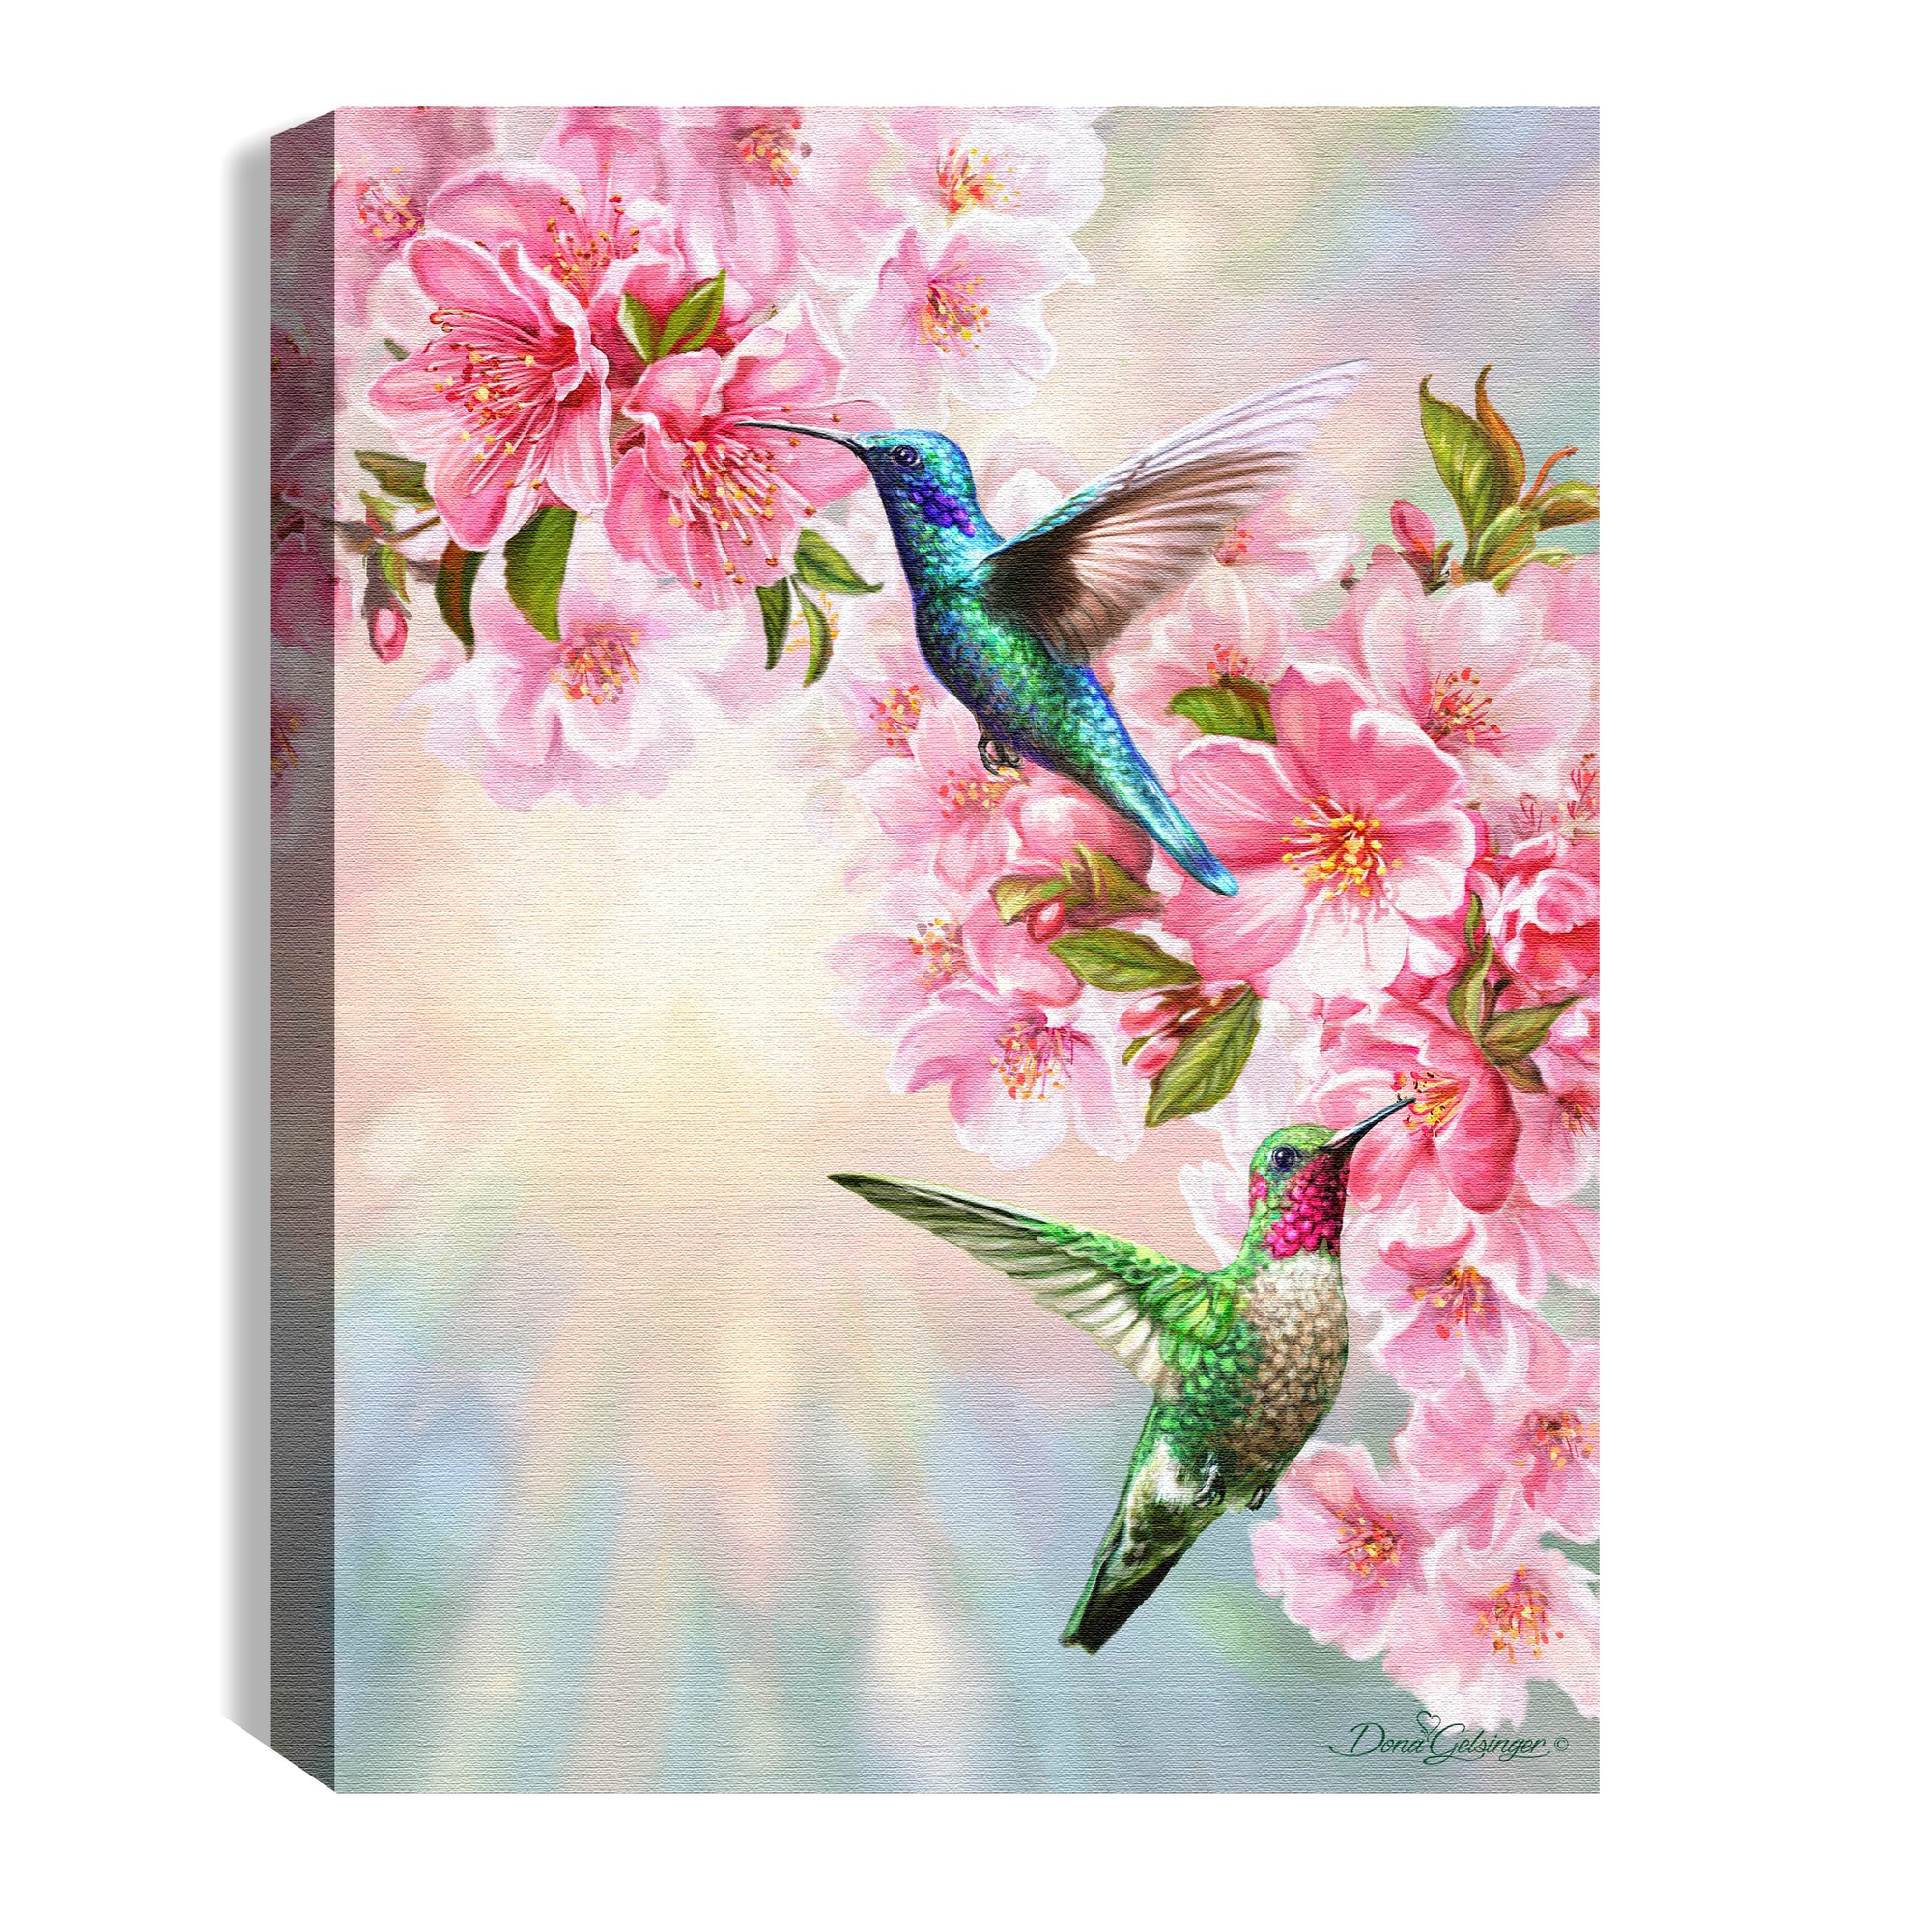 Hummingbirds in Spring 8x6 Lighted Tabletop Canvas